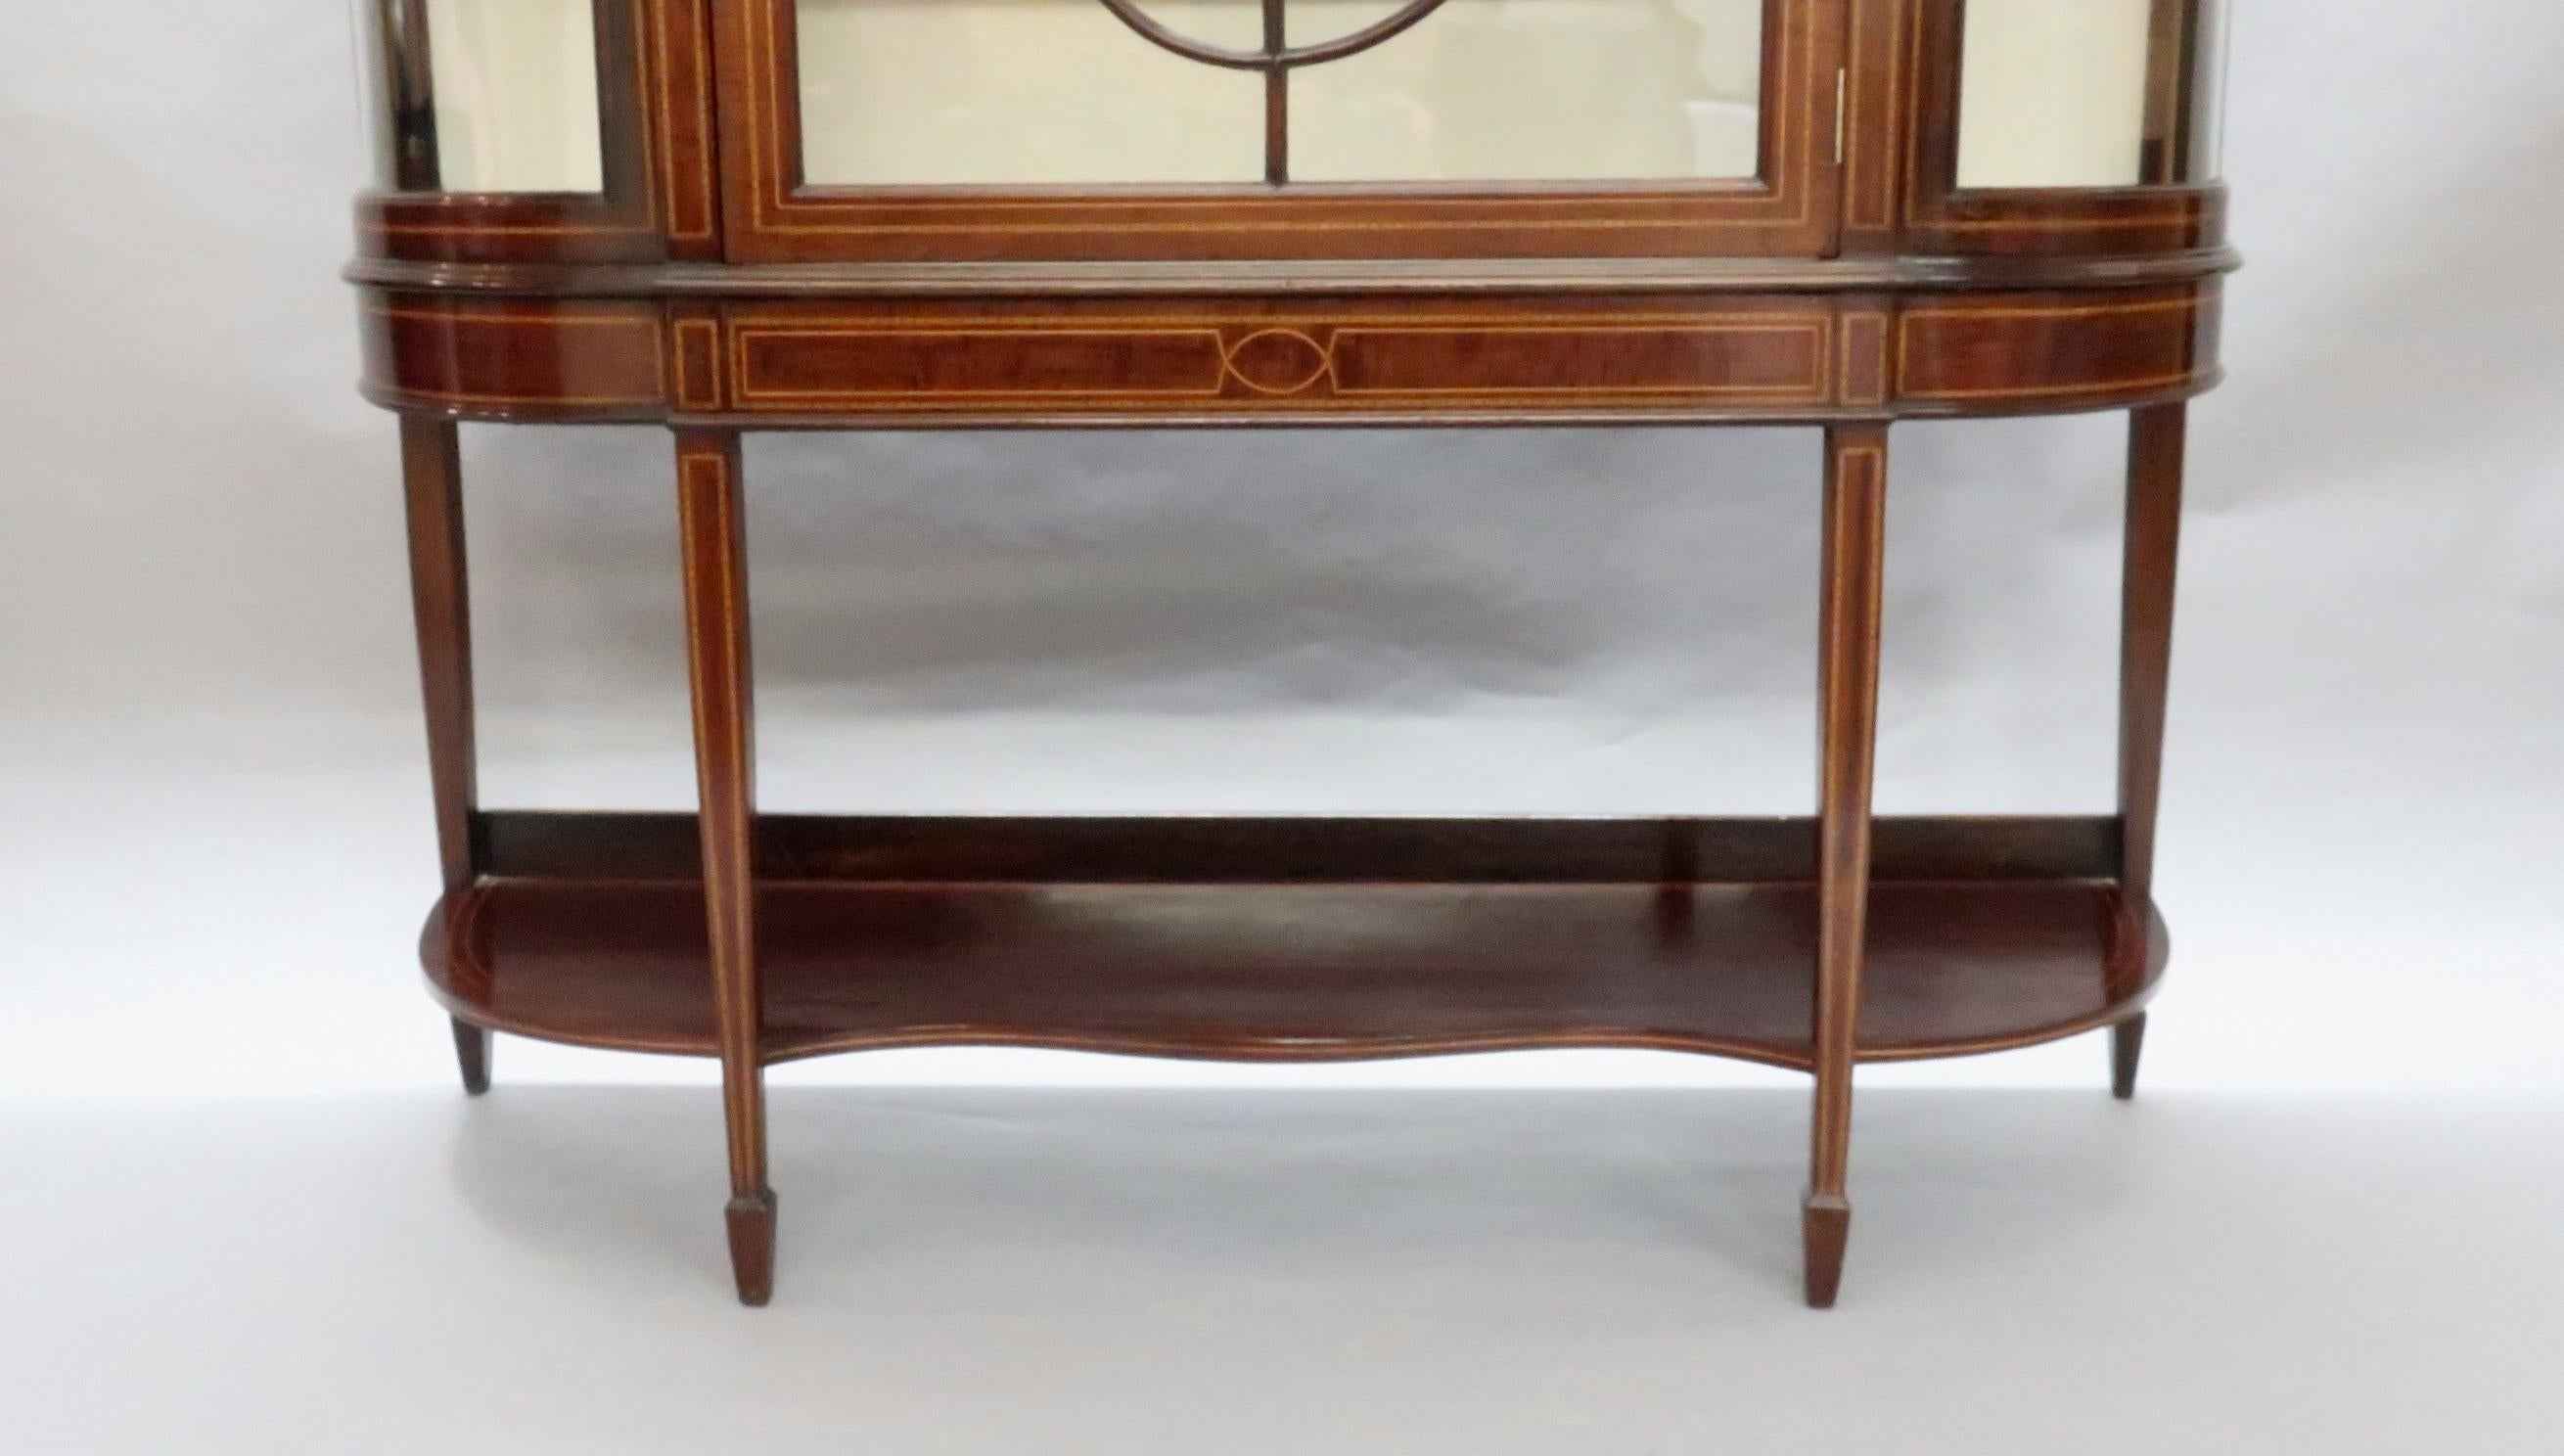 20th Century Edwardian Mahogany and Glass Bow Ended Display Cabinet with Shelves For Sale